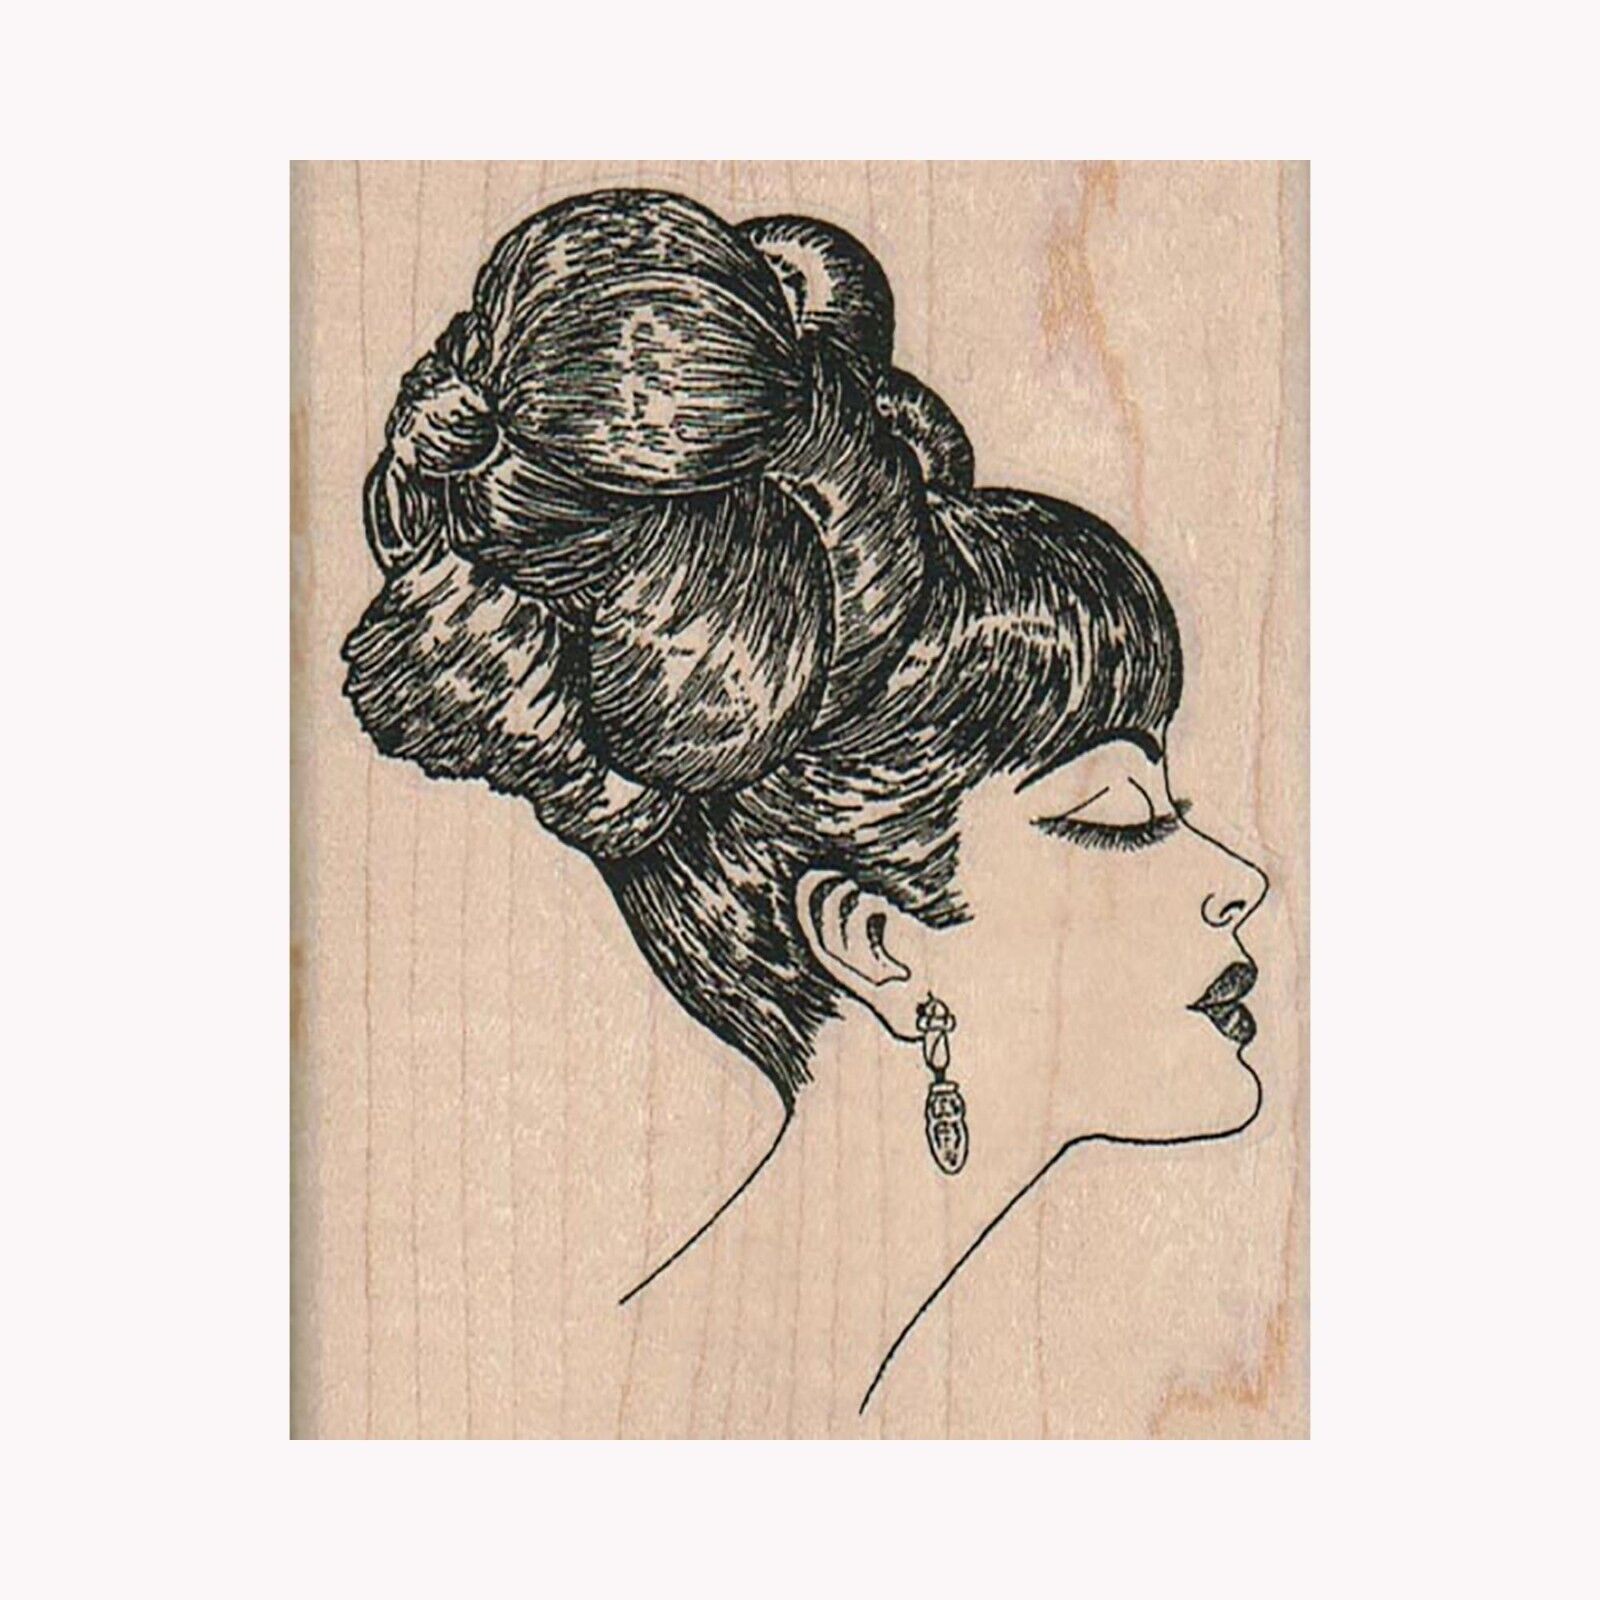 Mounted Rubber Stamp, High Hair Lady, Beautician, Updo, Hair Styling, Woman  | eBay